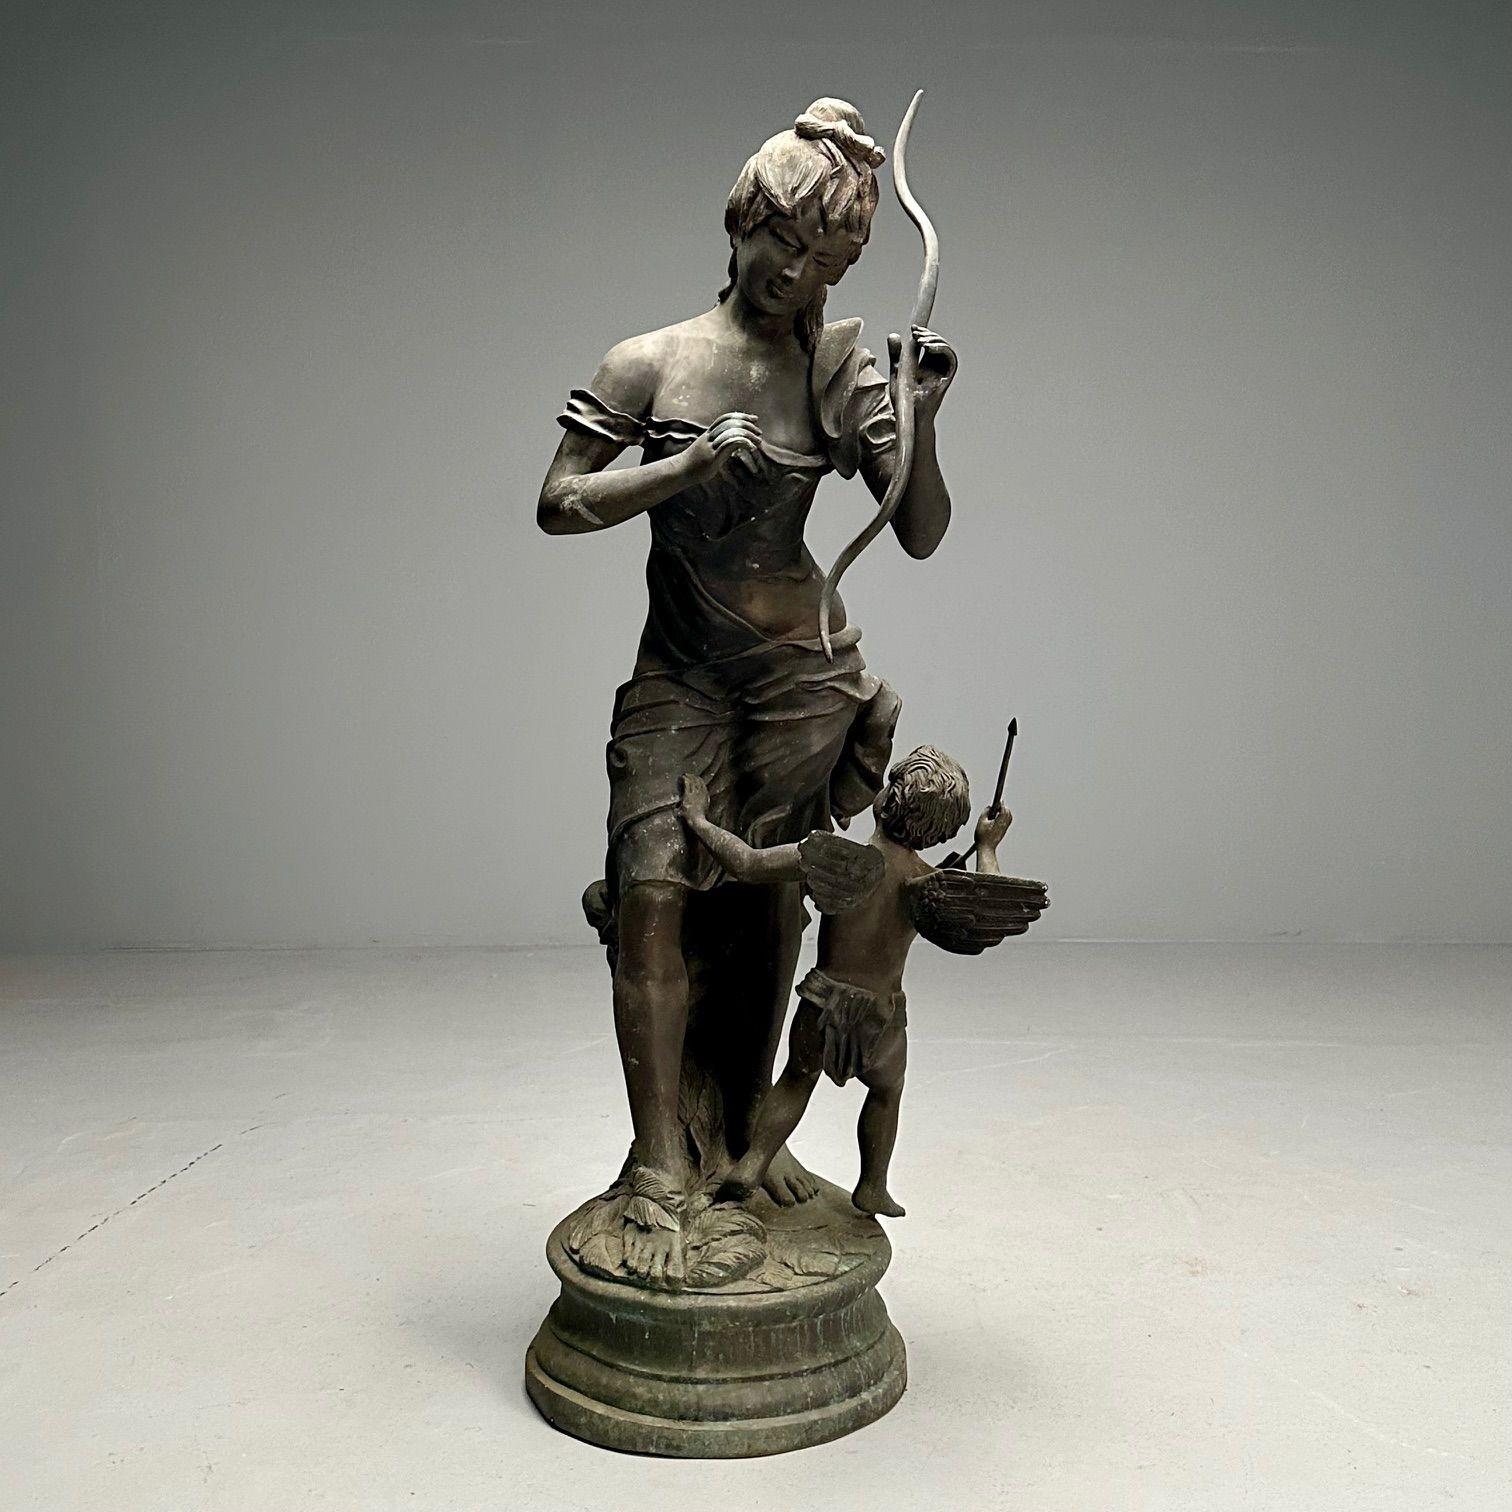 Patinated bronze statue of Venus disarming Cupid. Venus playfully holding Cupid's bow while Cupid is mid-air looking along. 
 
Purchased at Tepper Galleries in NYC and Shipped to São Paulo, Brazil, This life sized well defined statue was handed down